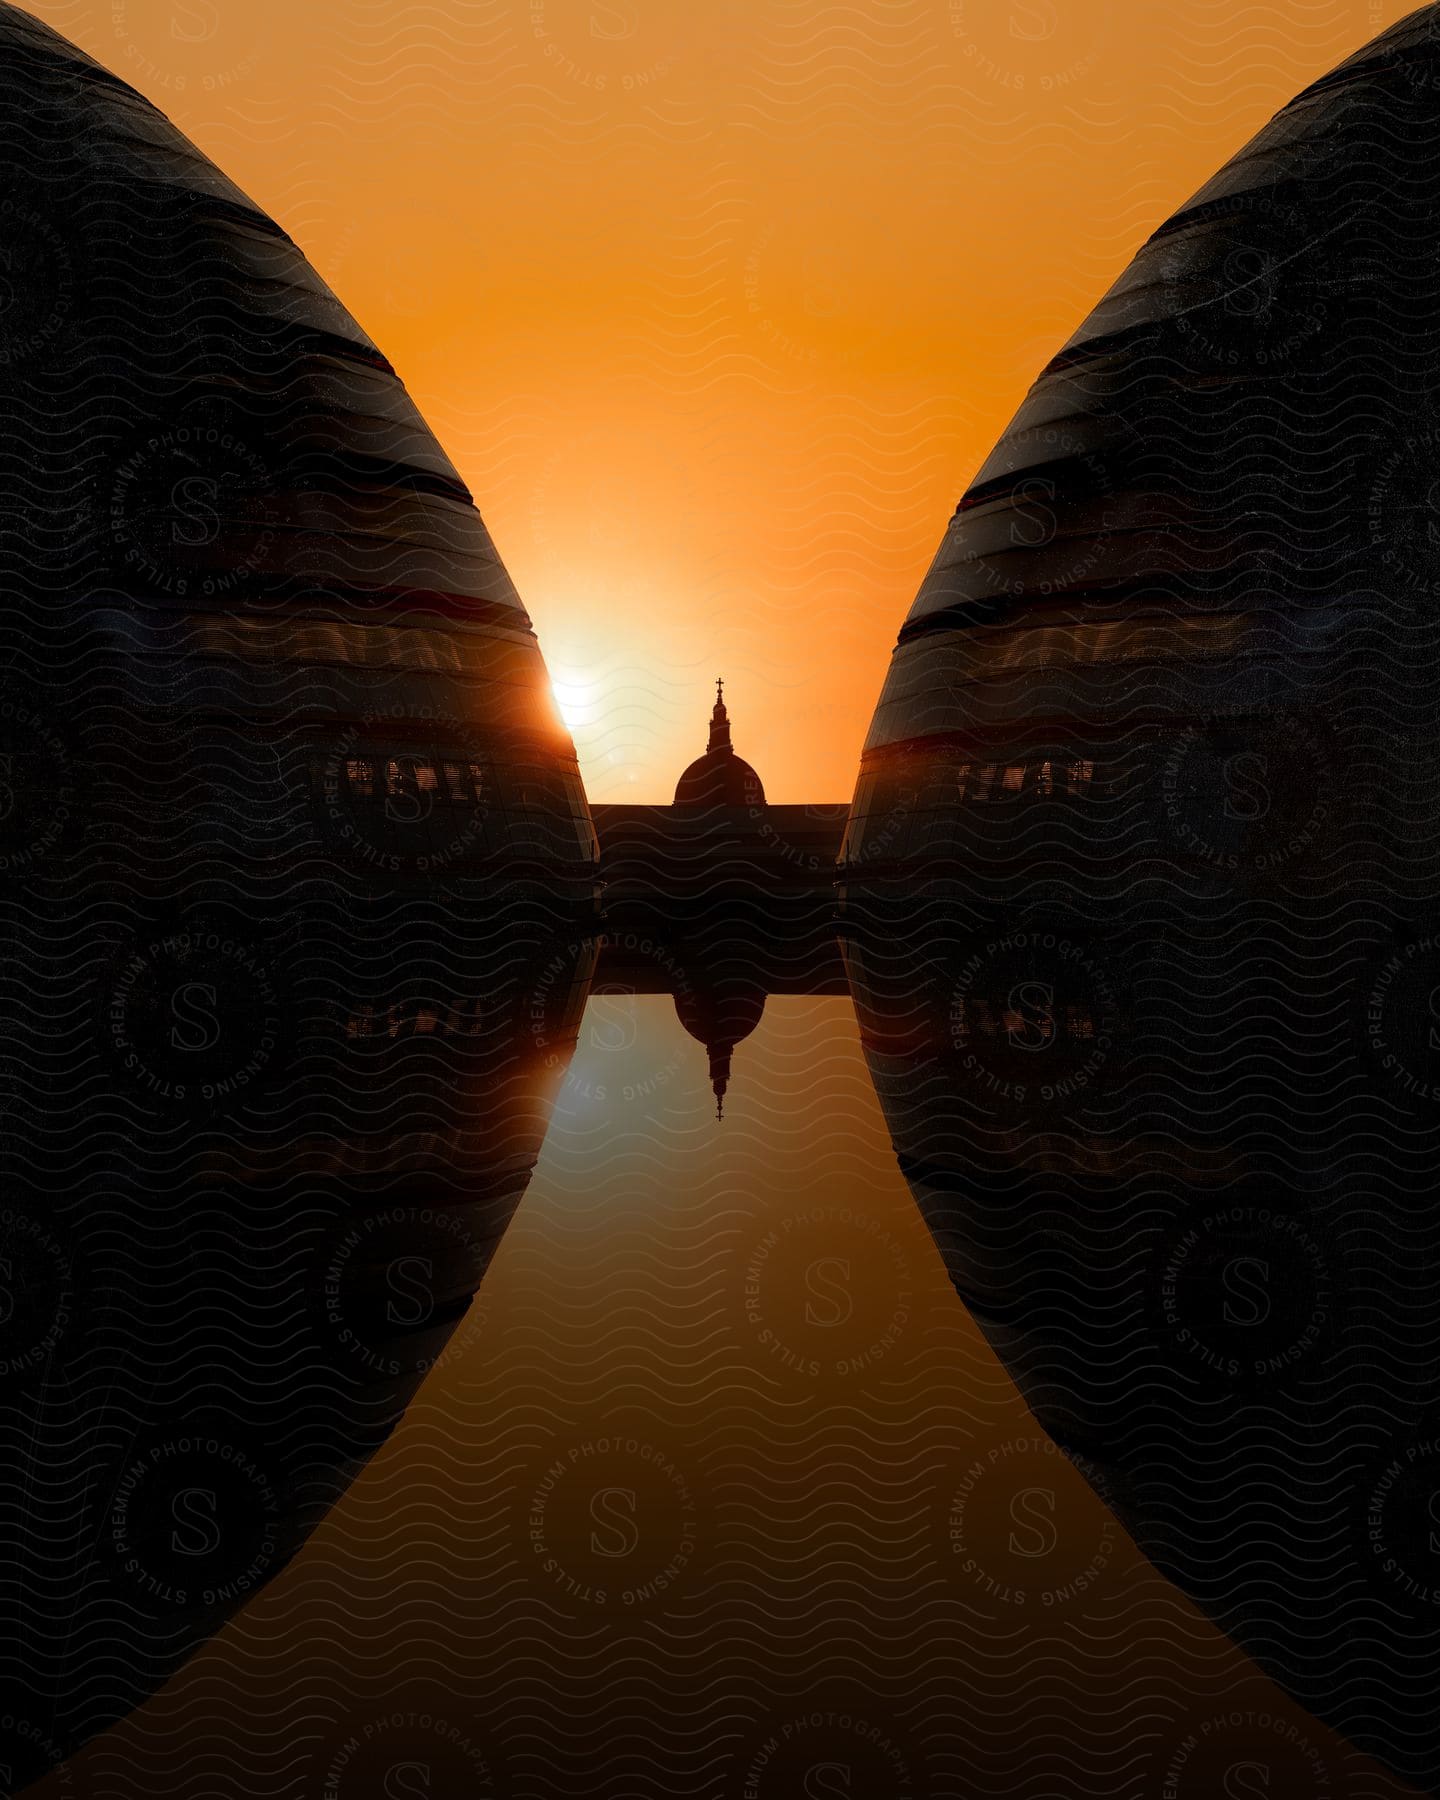 In between two large spherical buildings, the dome of a landmark building is illuminated by the sun which is set low in the sky.